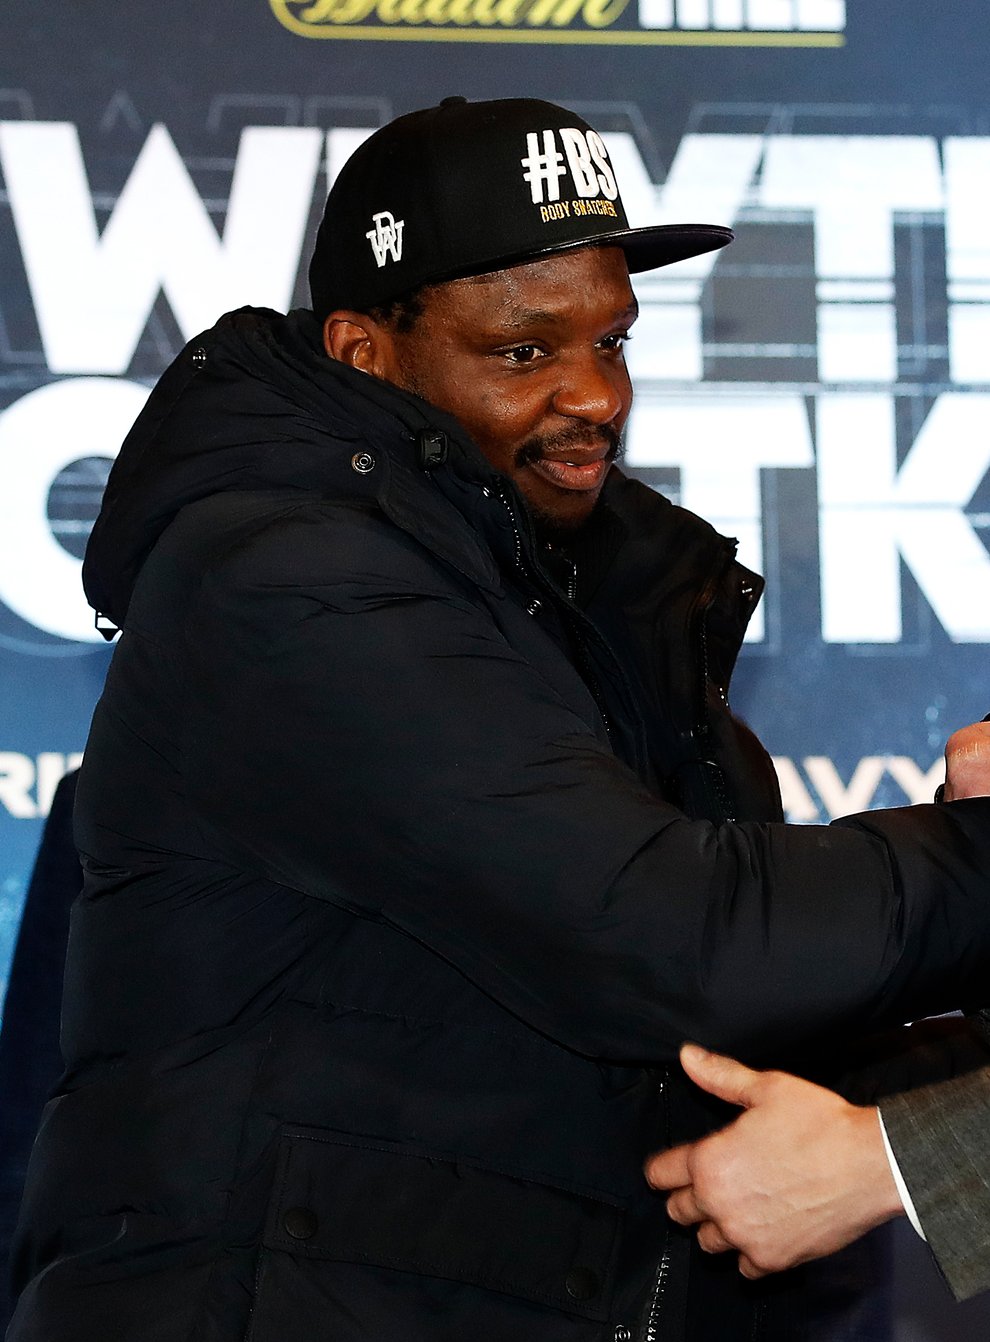 Whyte was knocked out by Povetkin back in August